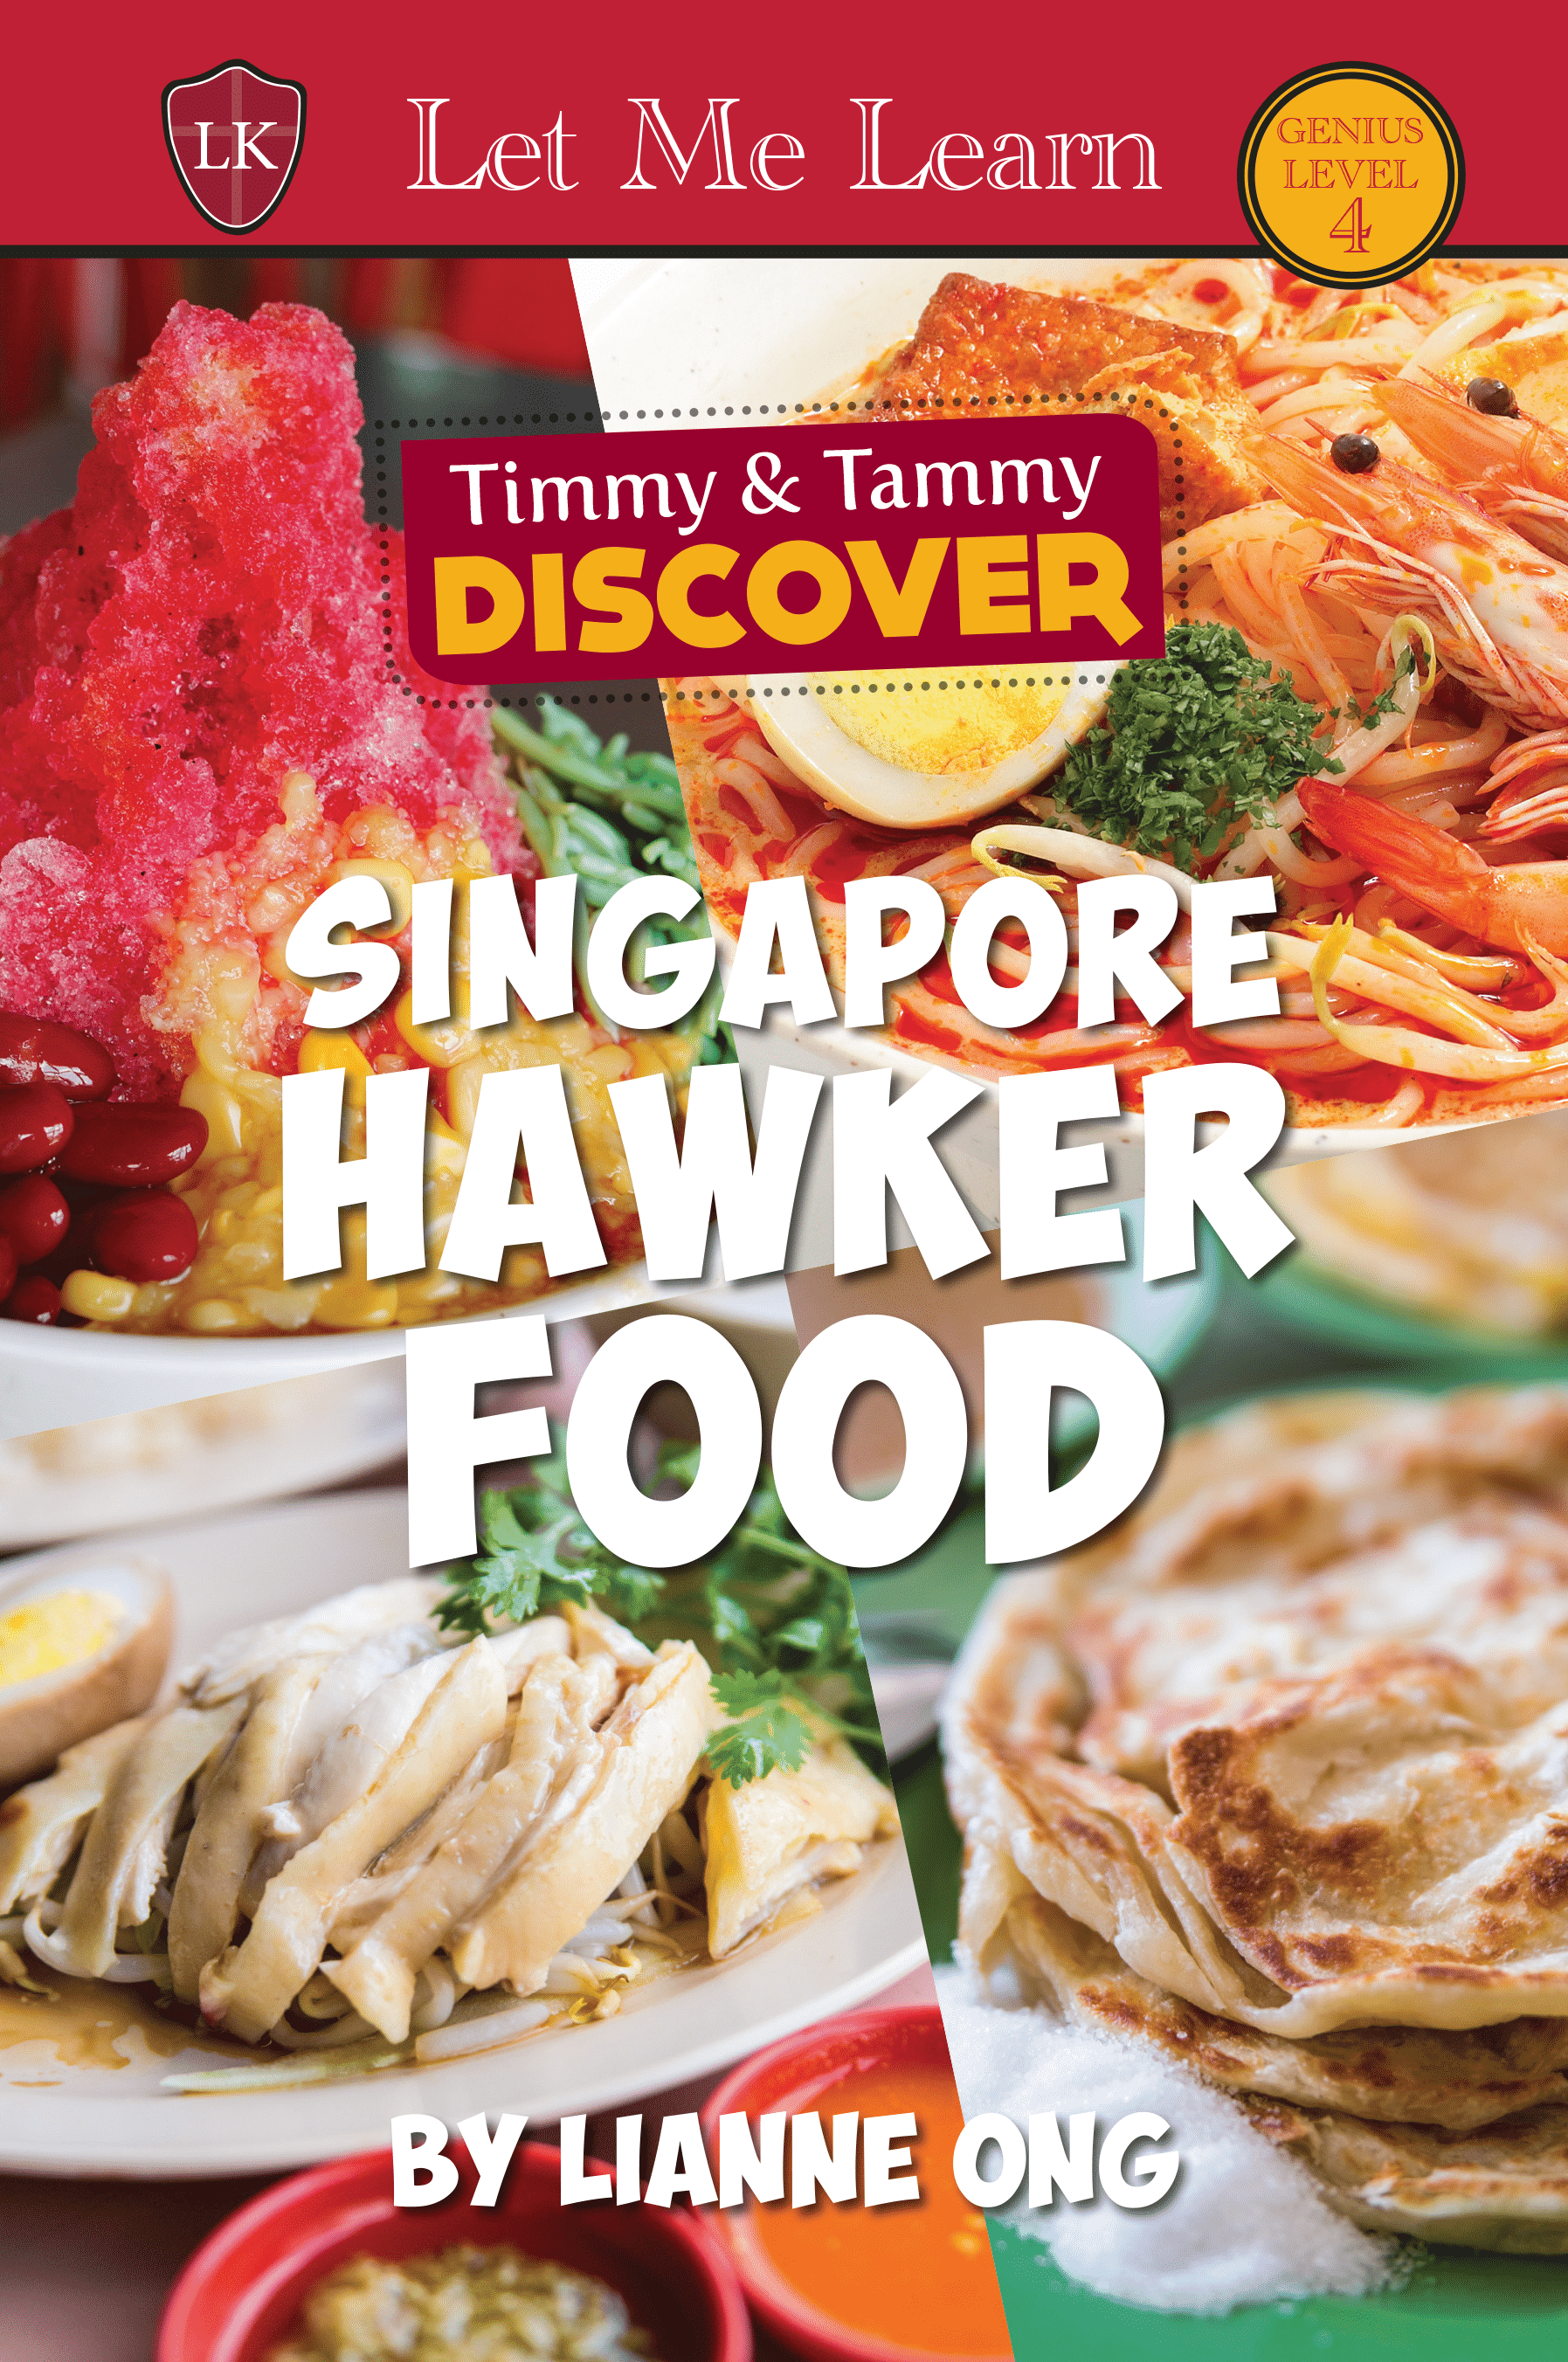 Timmy & Tammy Discover (Level 4): Singapore Hawker Food